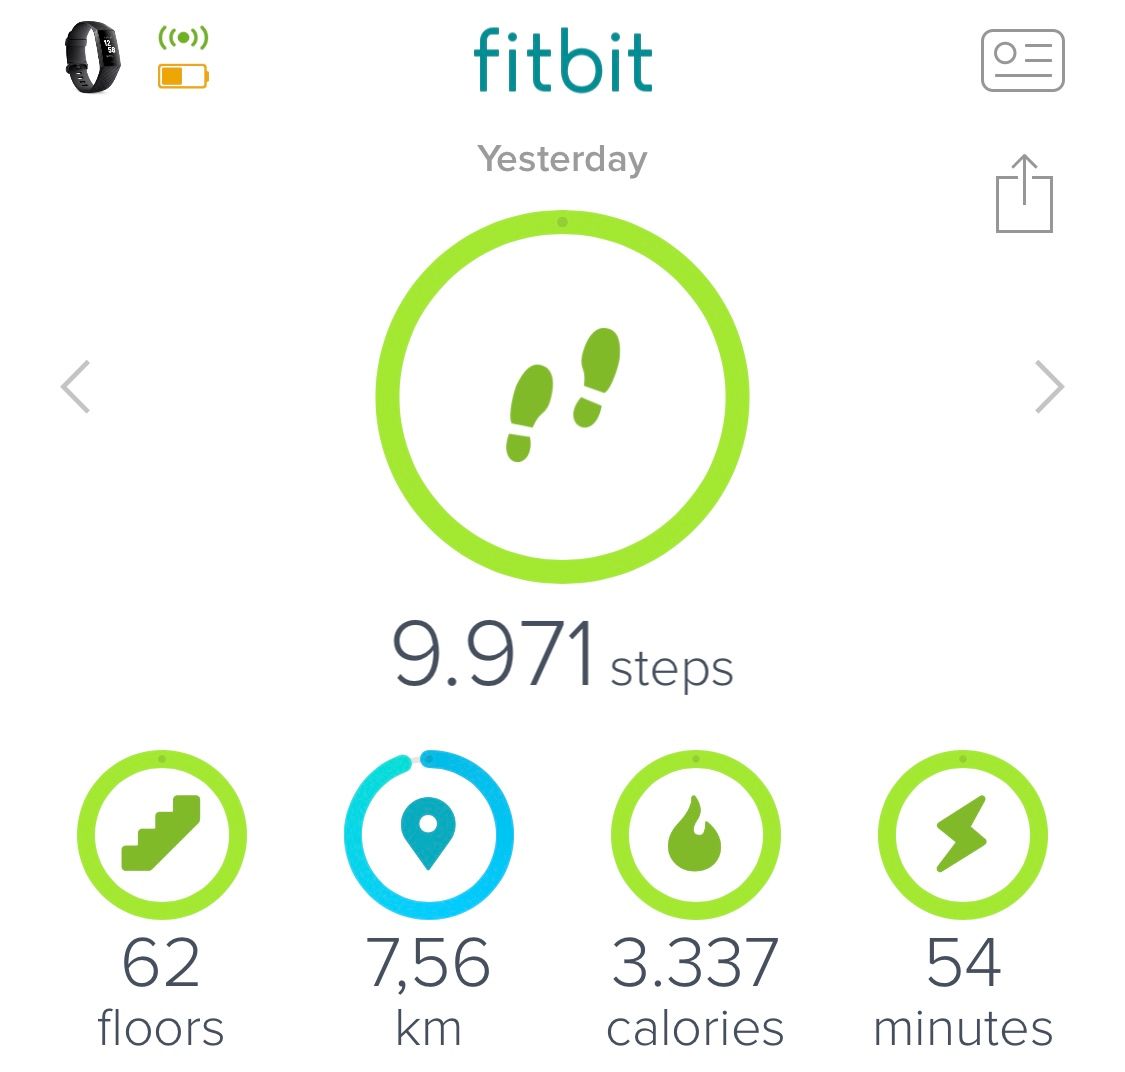 Wildly inaccurate floor count - Fitbit 